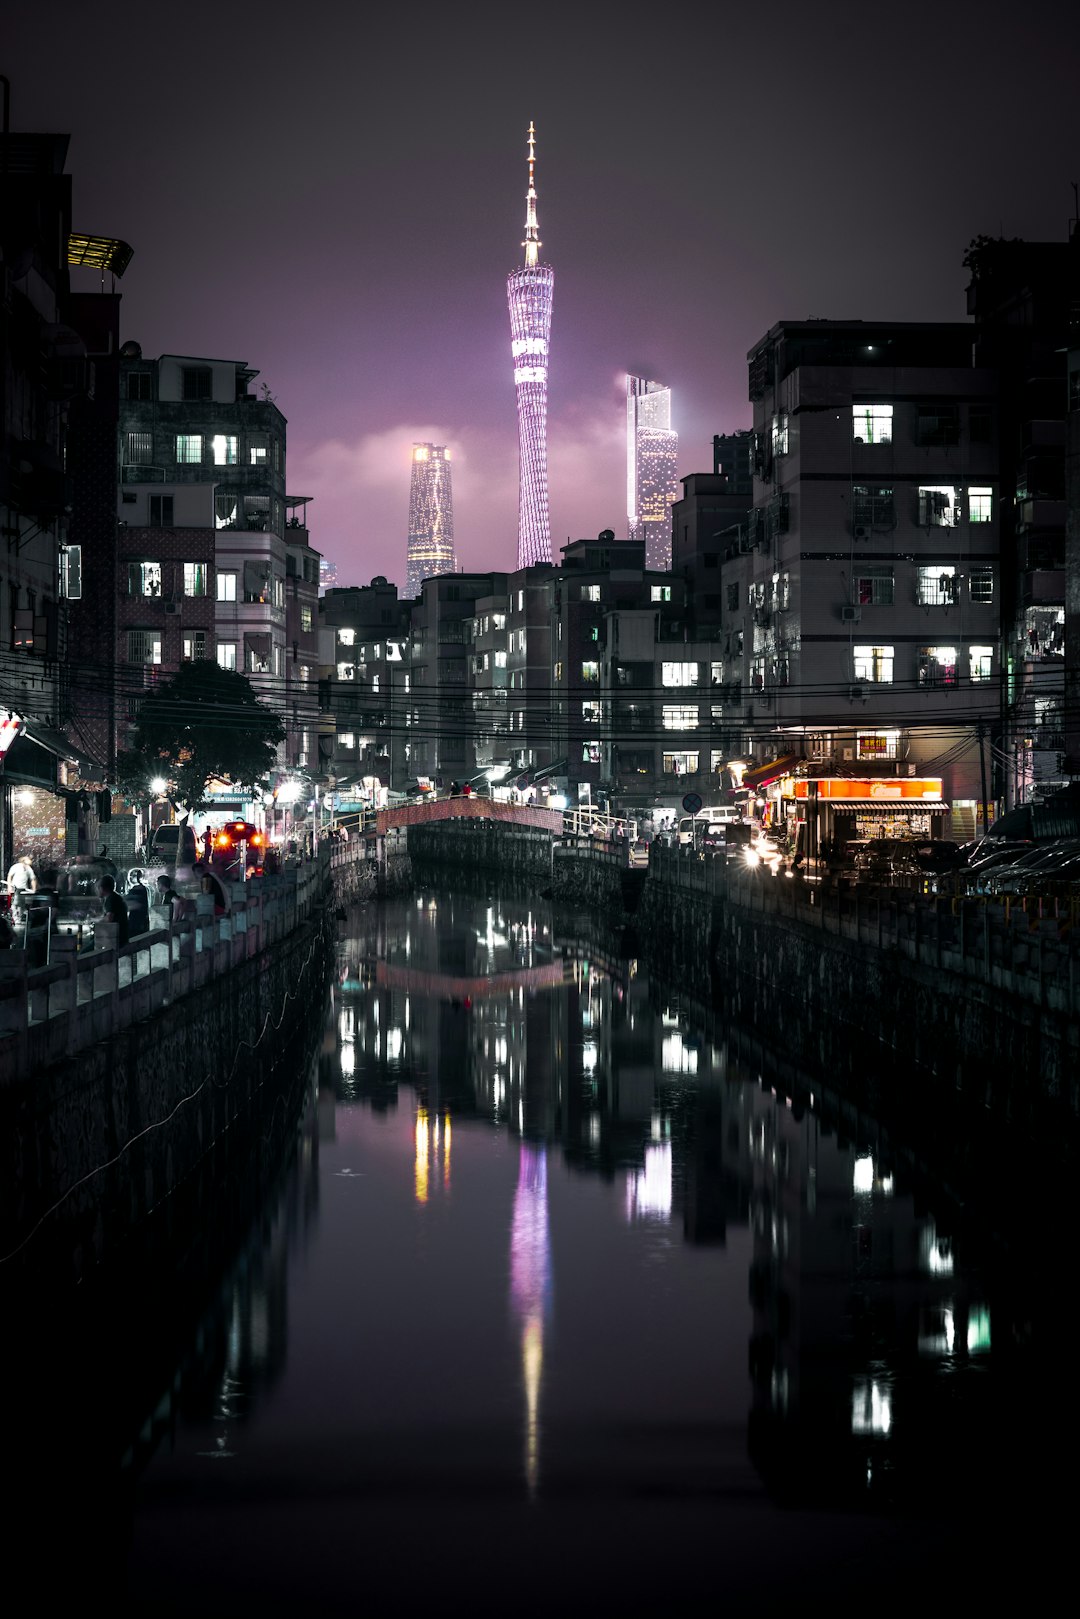 buildings reflected on water at night